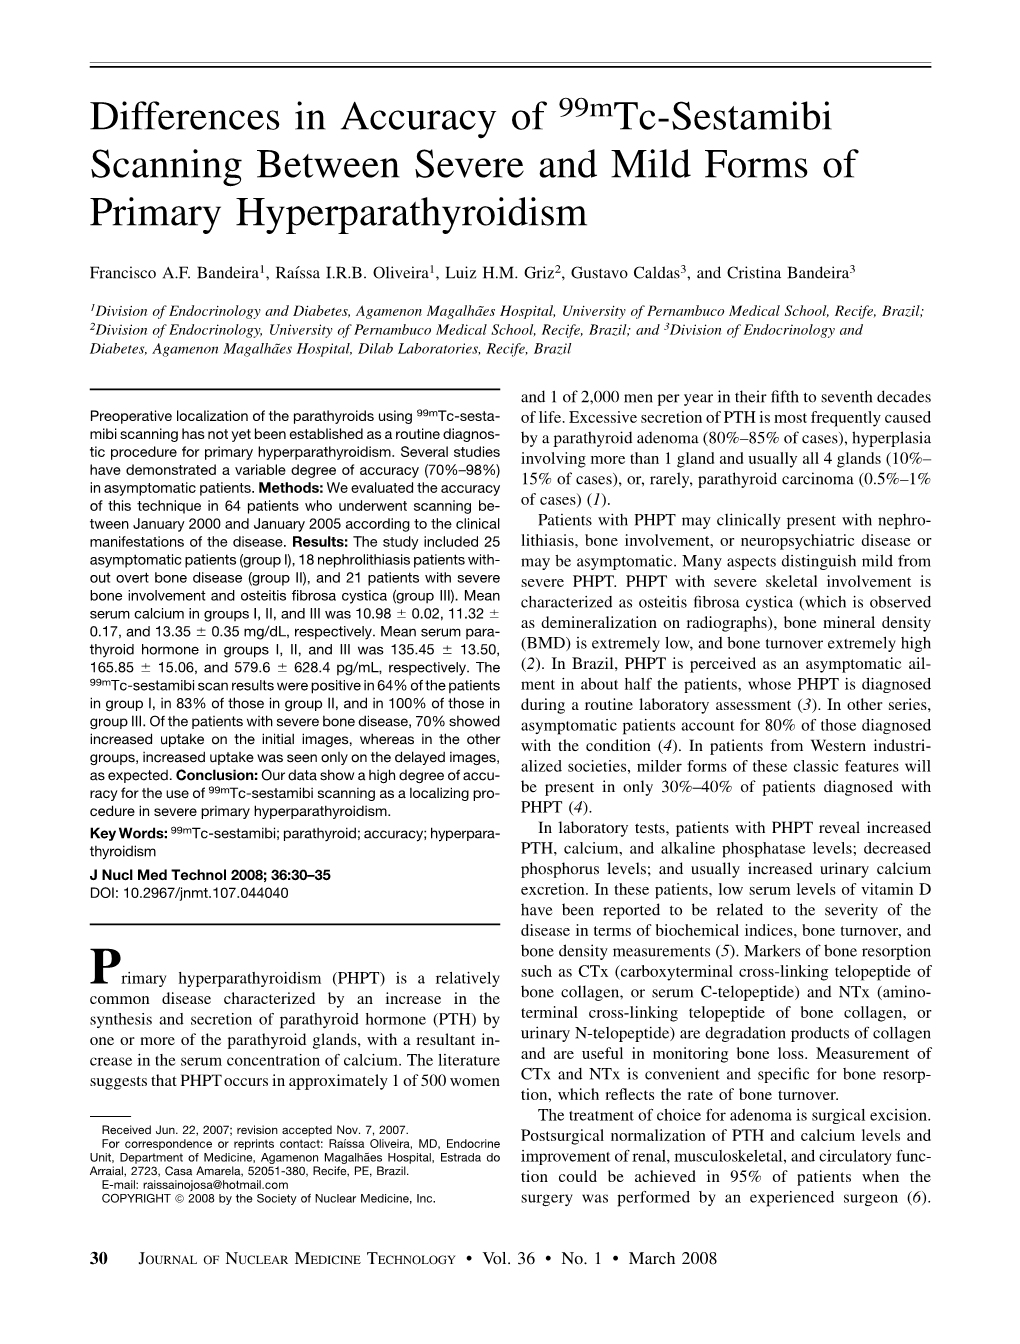 Differences in Accuracy of 99Mtc-Sestamibi Scanning Between Severe and Mild Forms of Primary Hyperparathyroidism